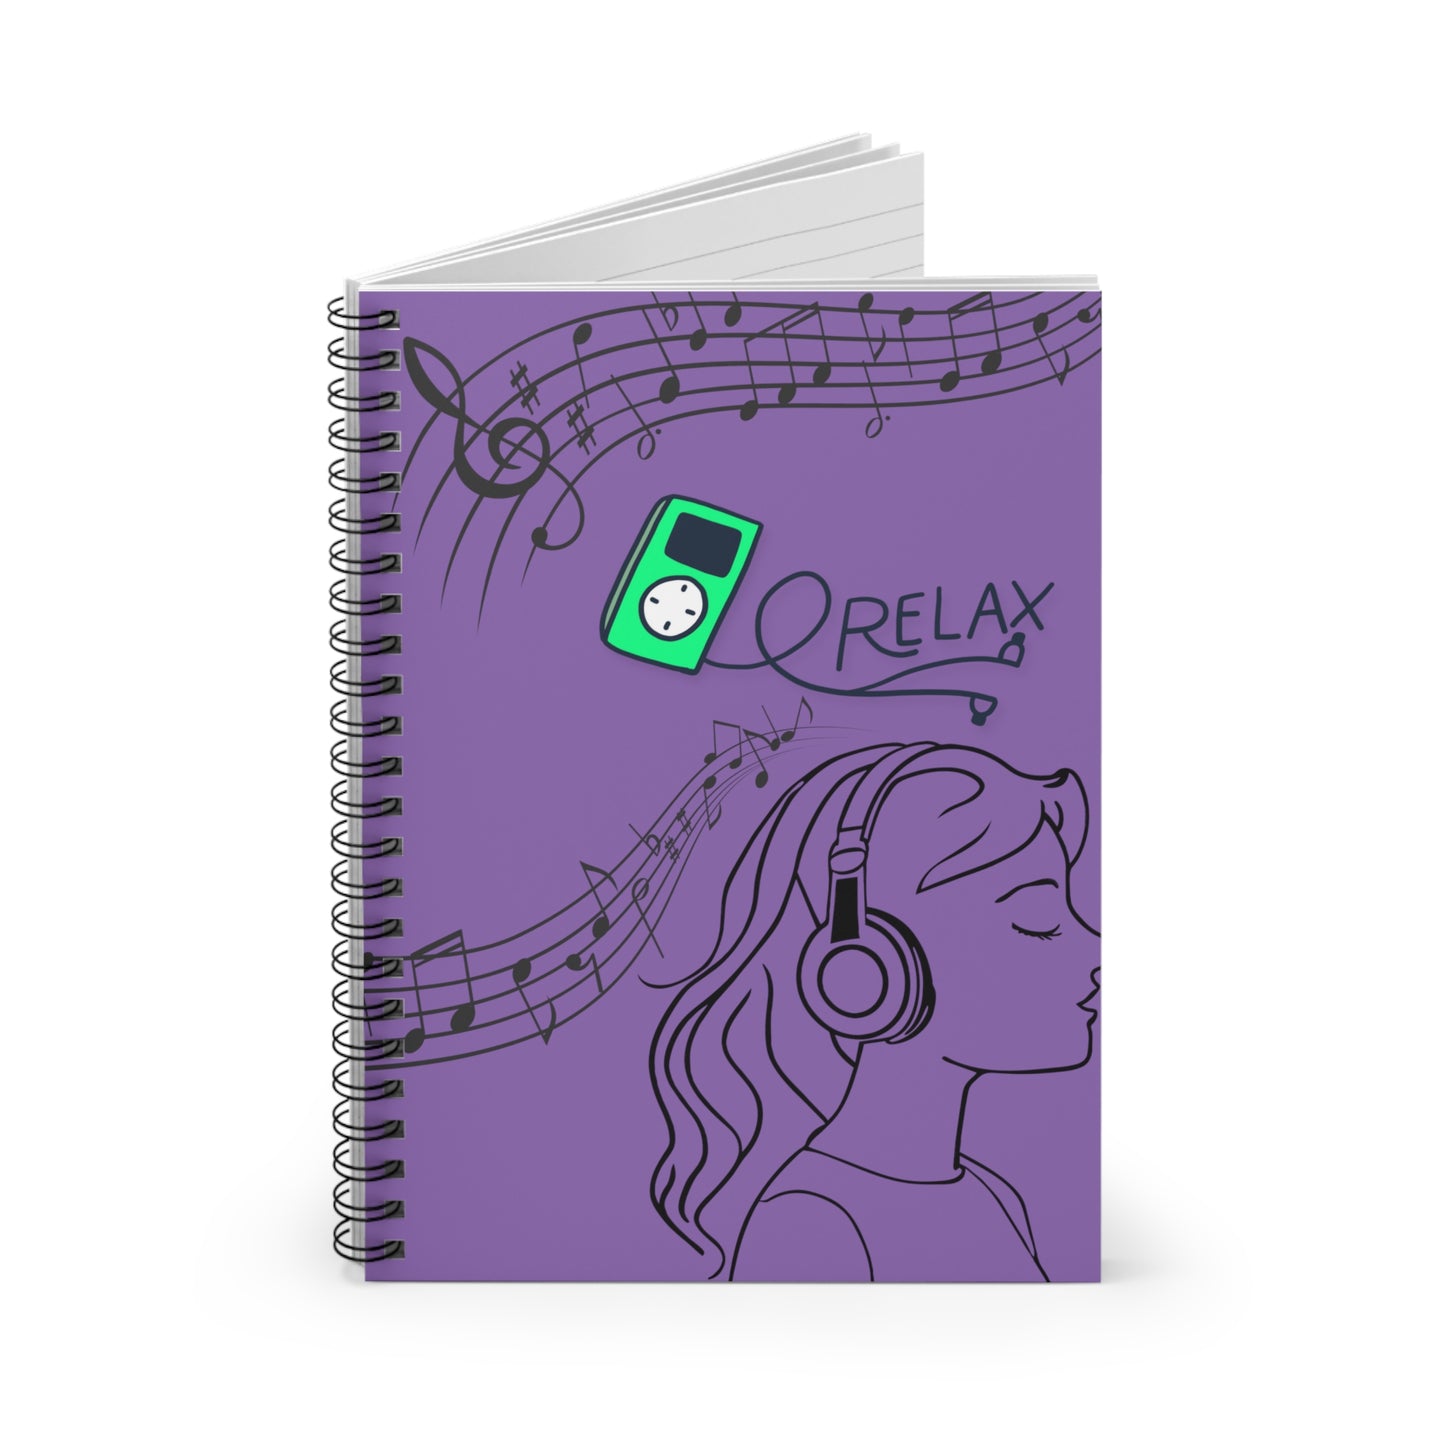 Relax in Solitude: Spiral Notebook - Log Books - Journals - Diaries - and More Custom Printed by TheGlassyLass.com